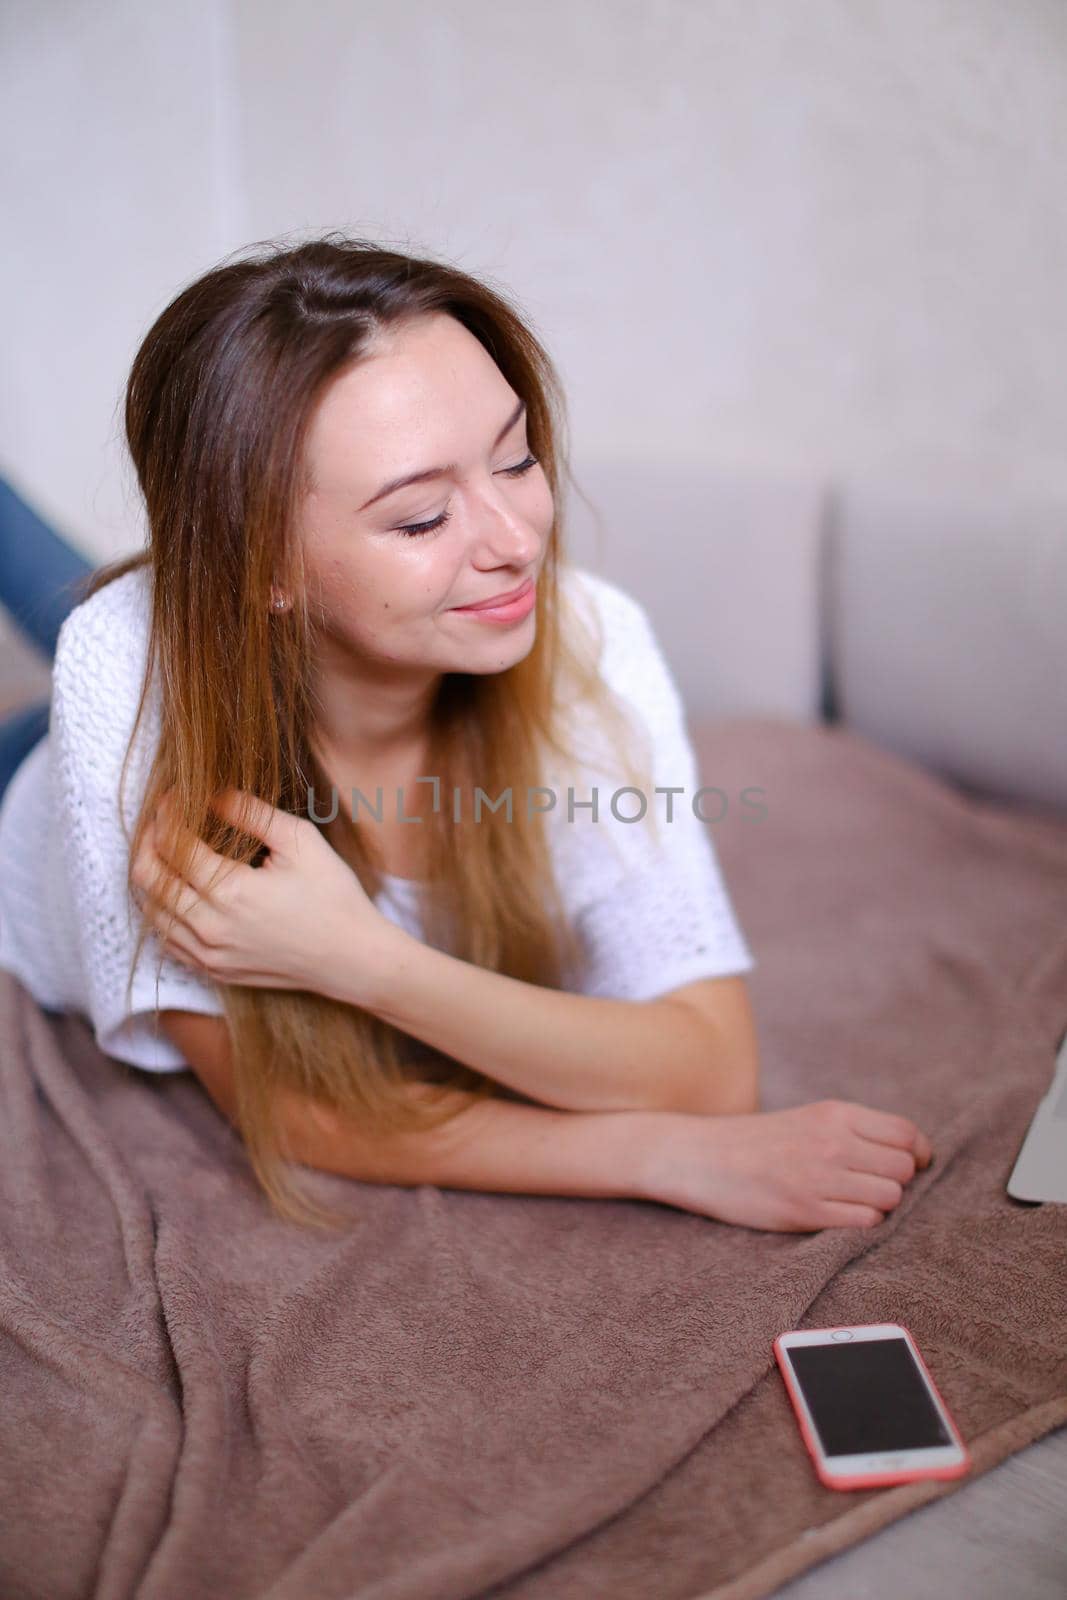 Young woman lying on bed near smartphone. Concept of rest, leisure time and modern technology.